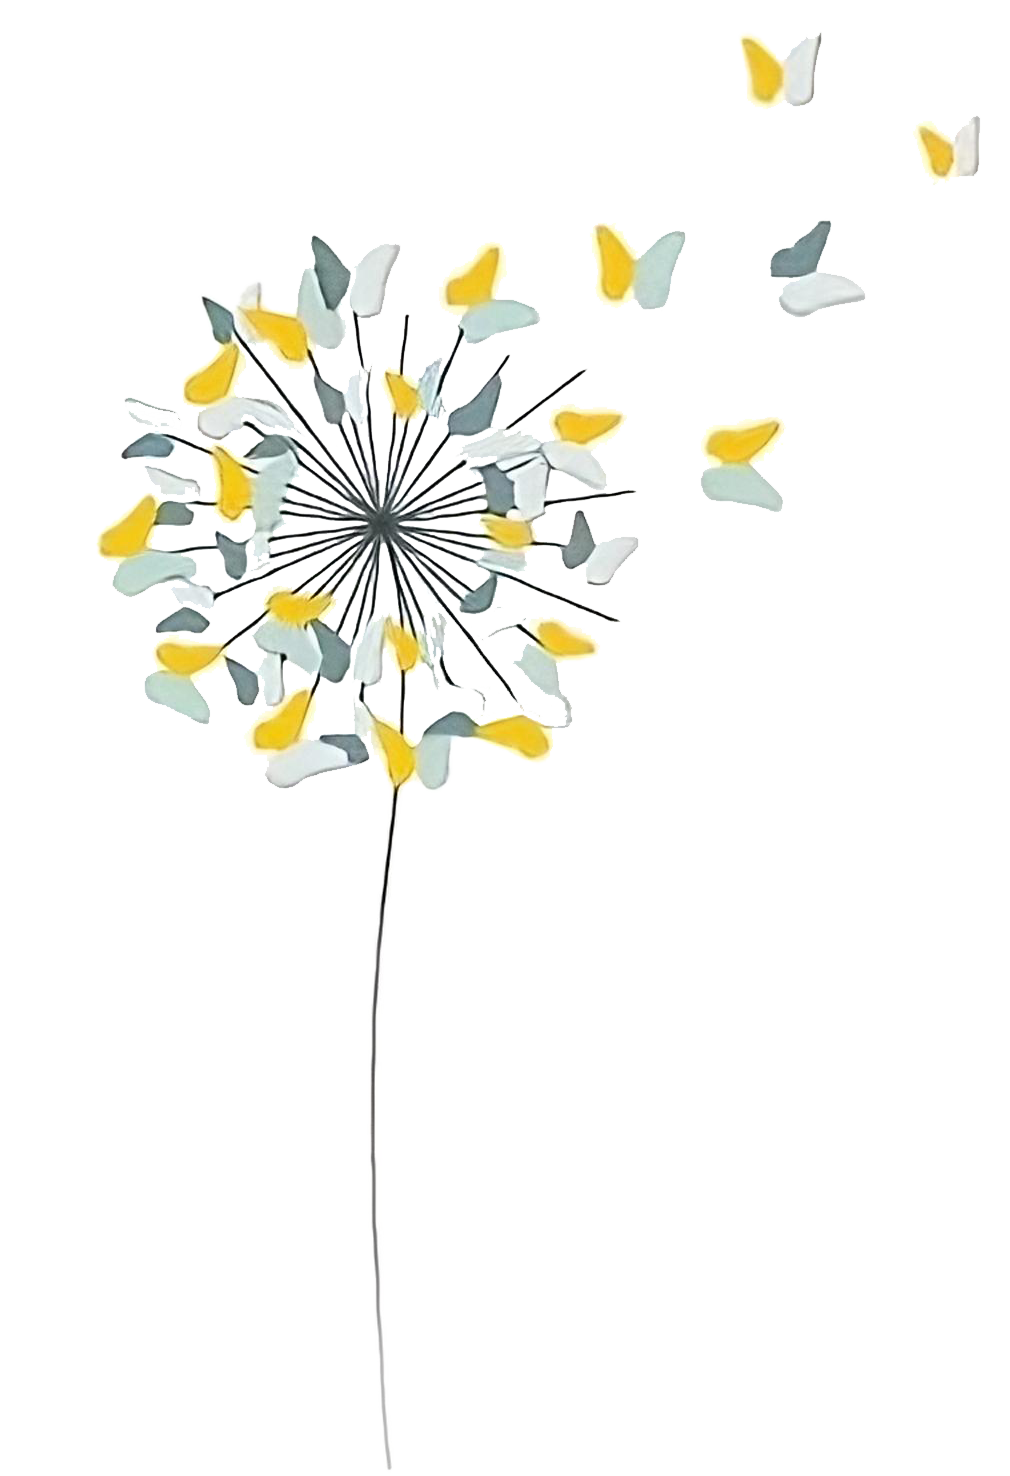 Artwork of daisy with leaves turning into butterflies flying off